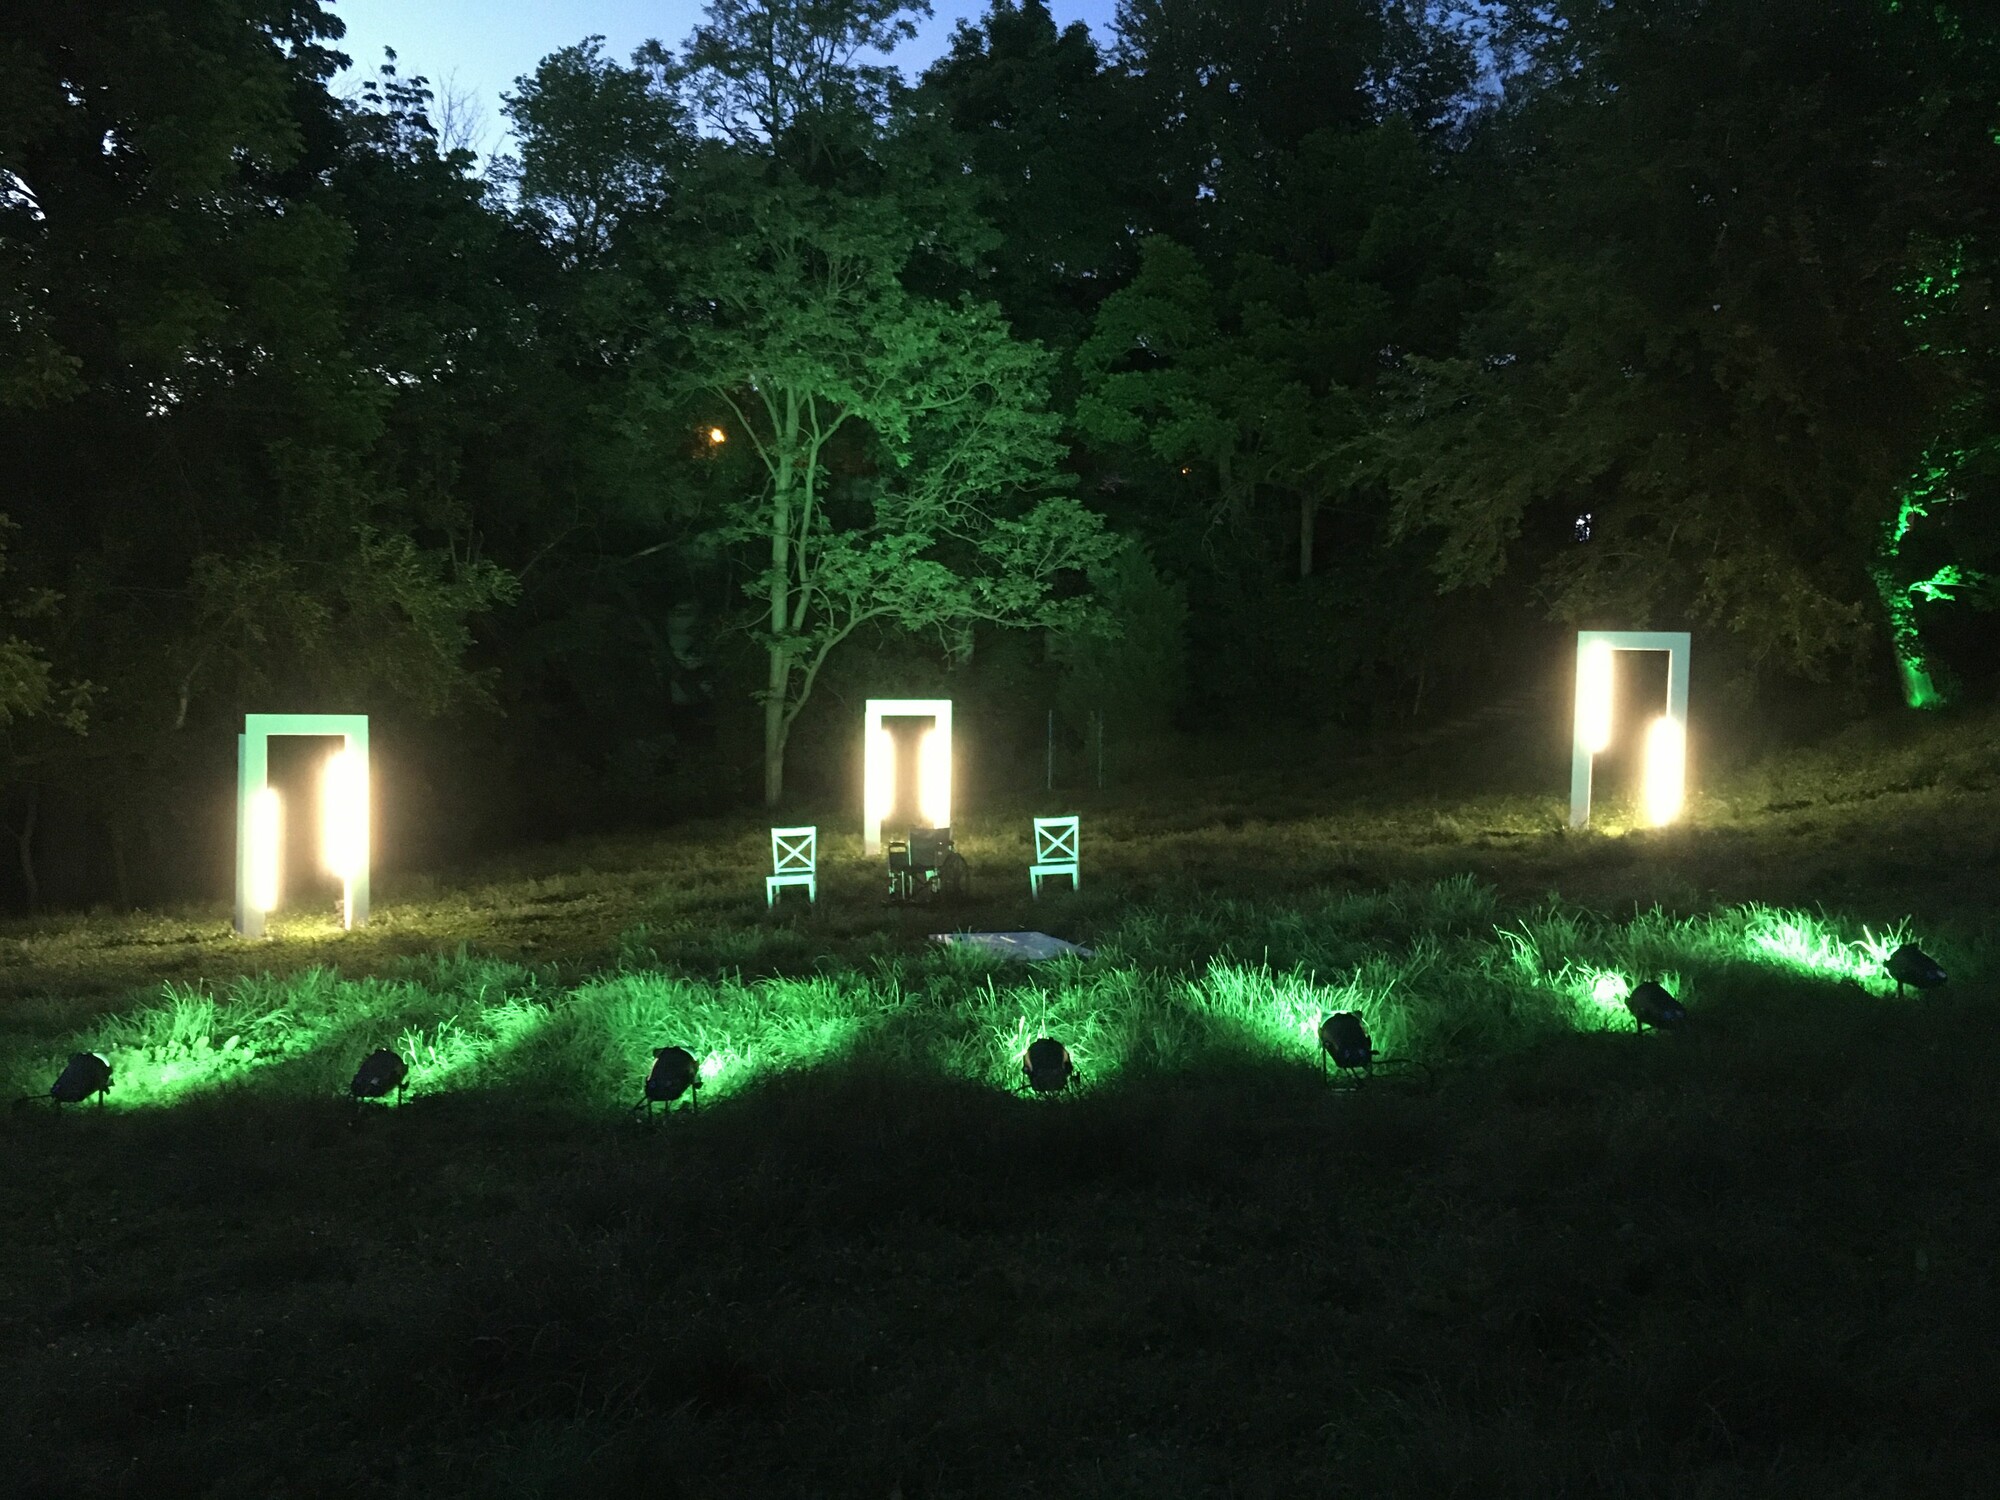 A series of lights illuminate three mirrors at the treeline of a forest.